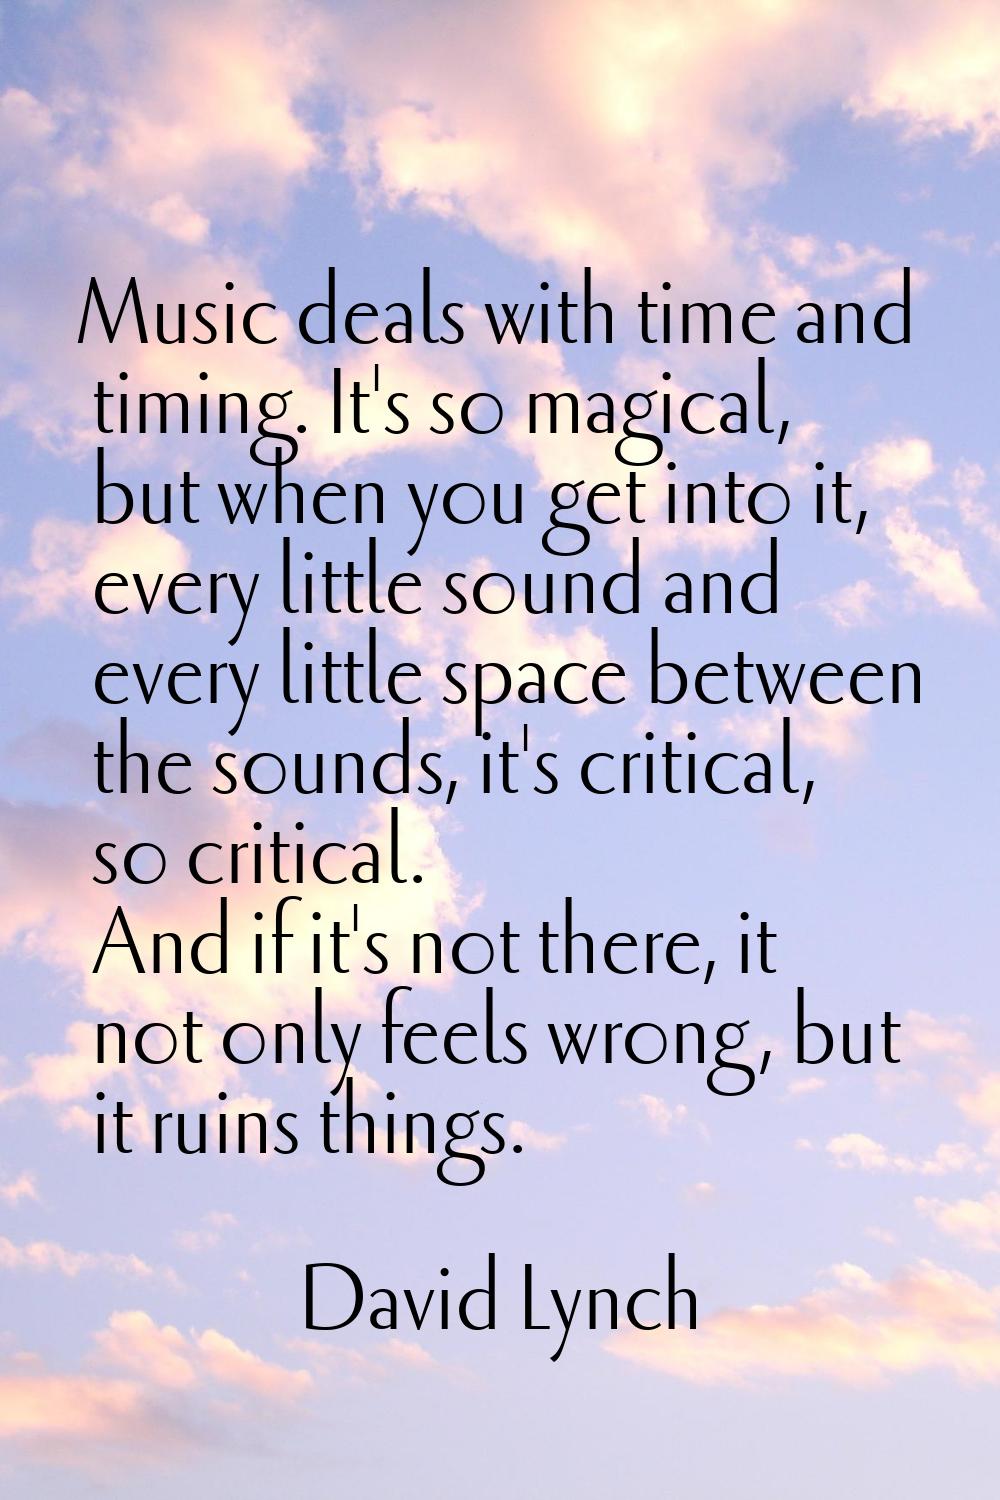 Music deals with time and timing. It's so magical, but when you get into it, every little sound and